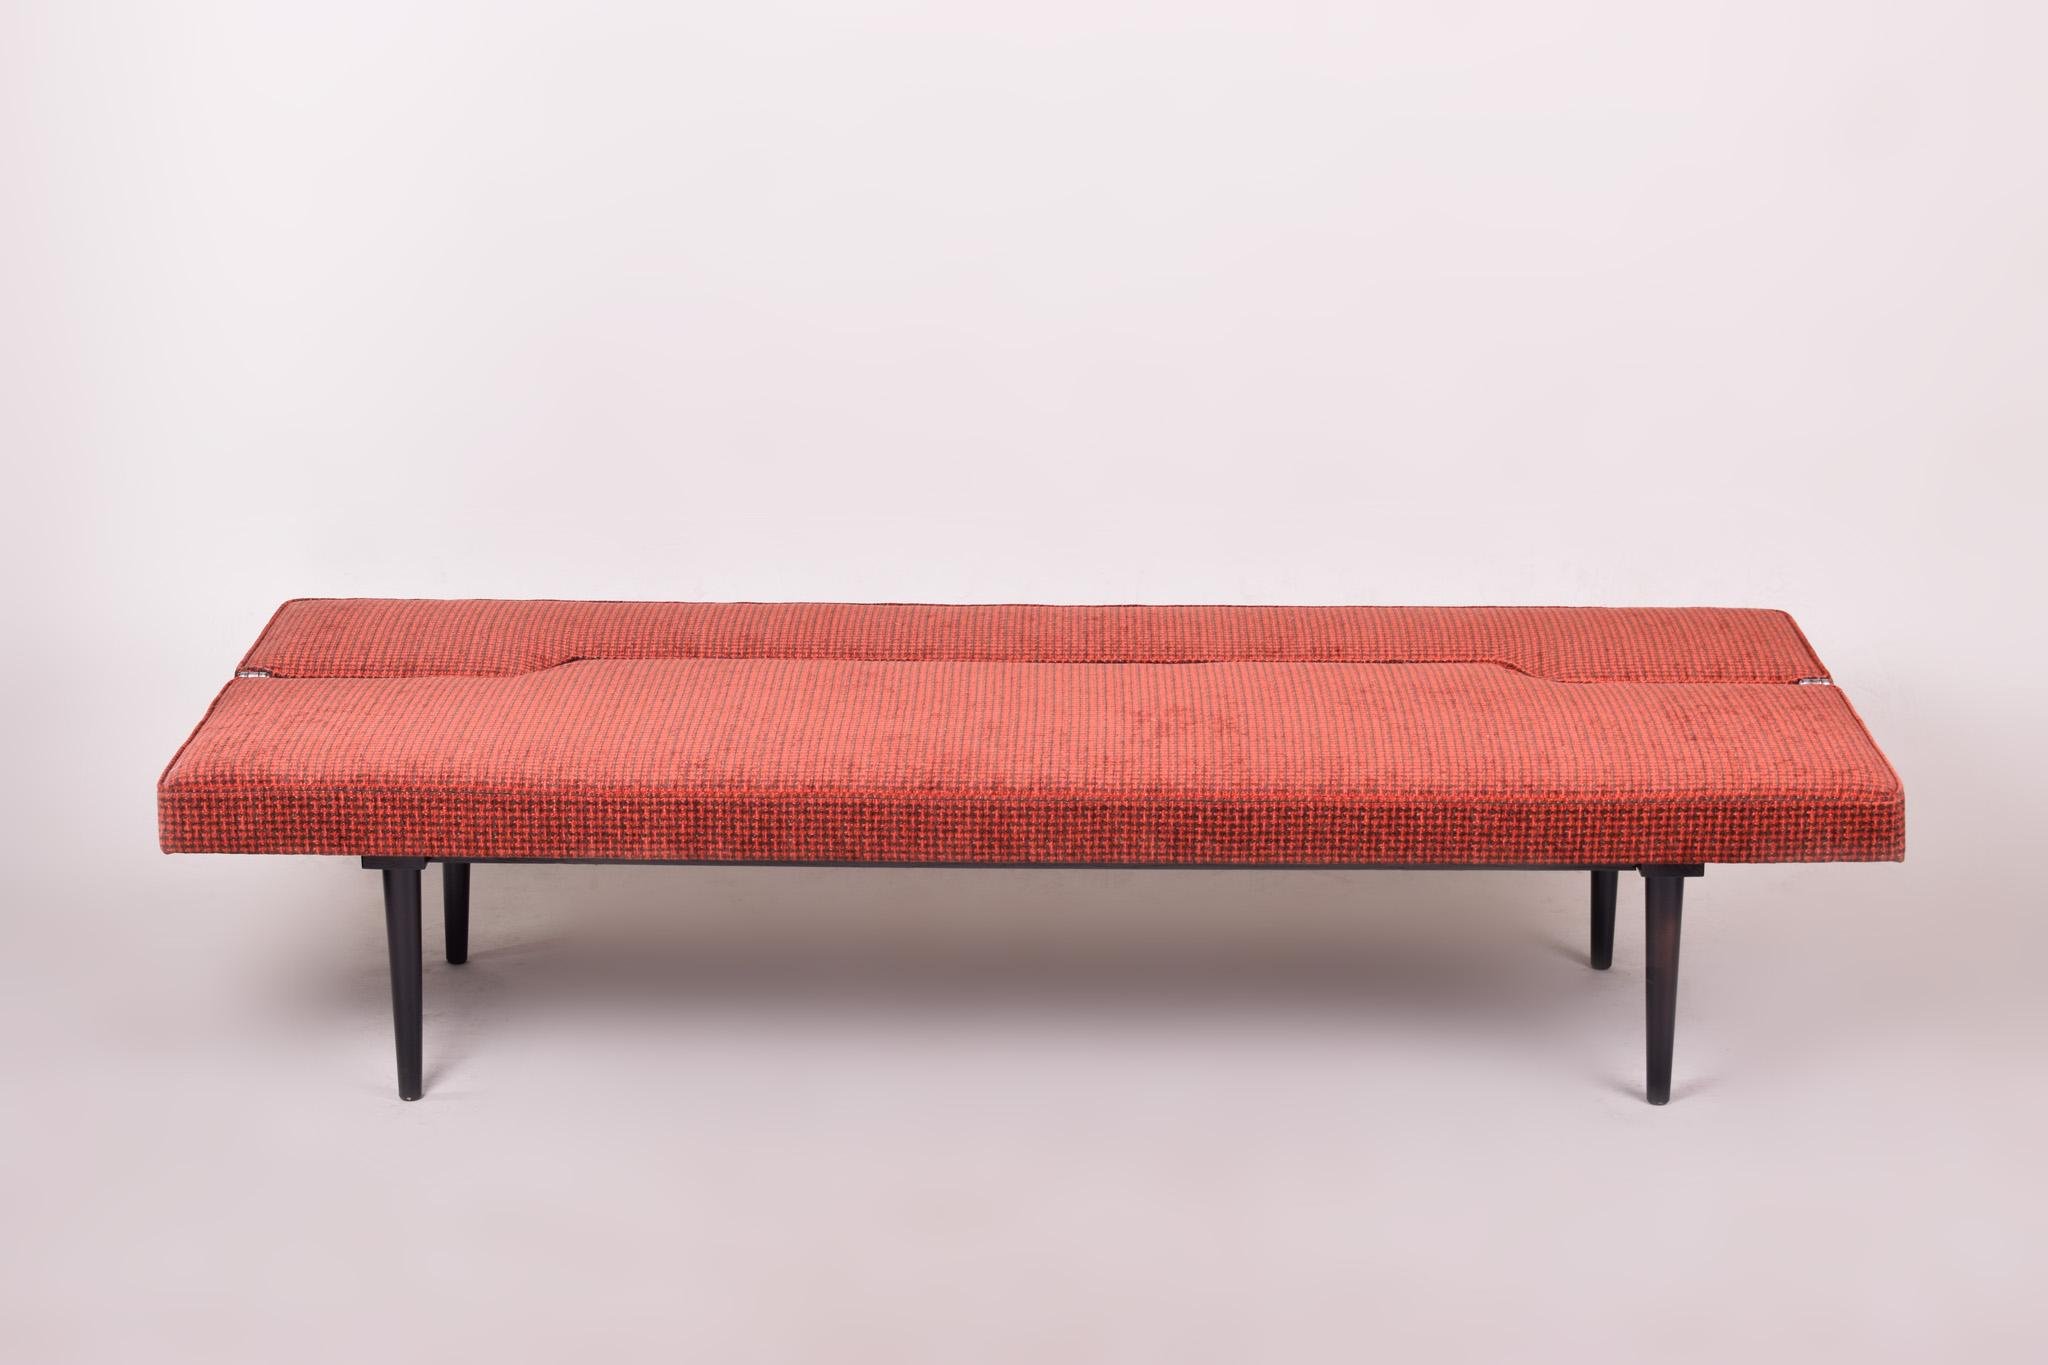 Czech Salmon Midcentury Modern Sofa Made and Designed in 1962 by Miroslav Navratil For Sale